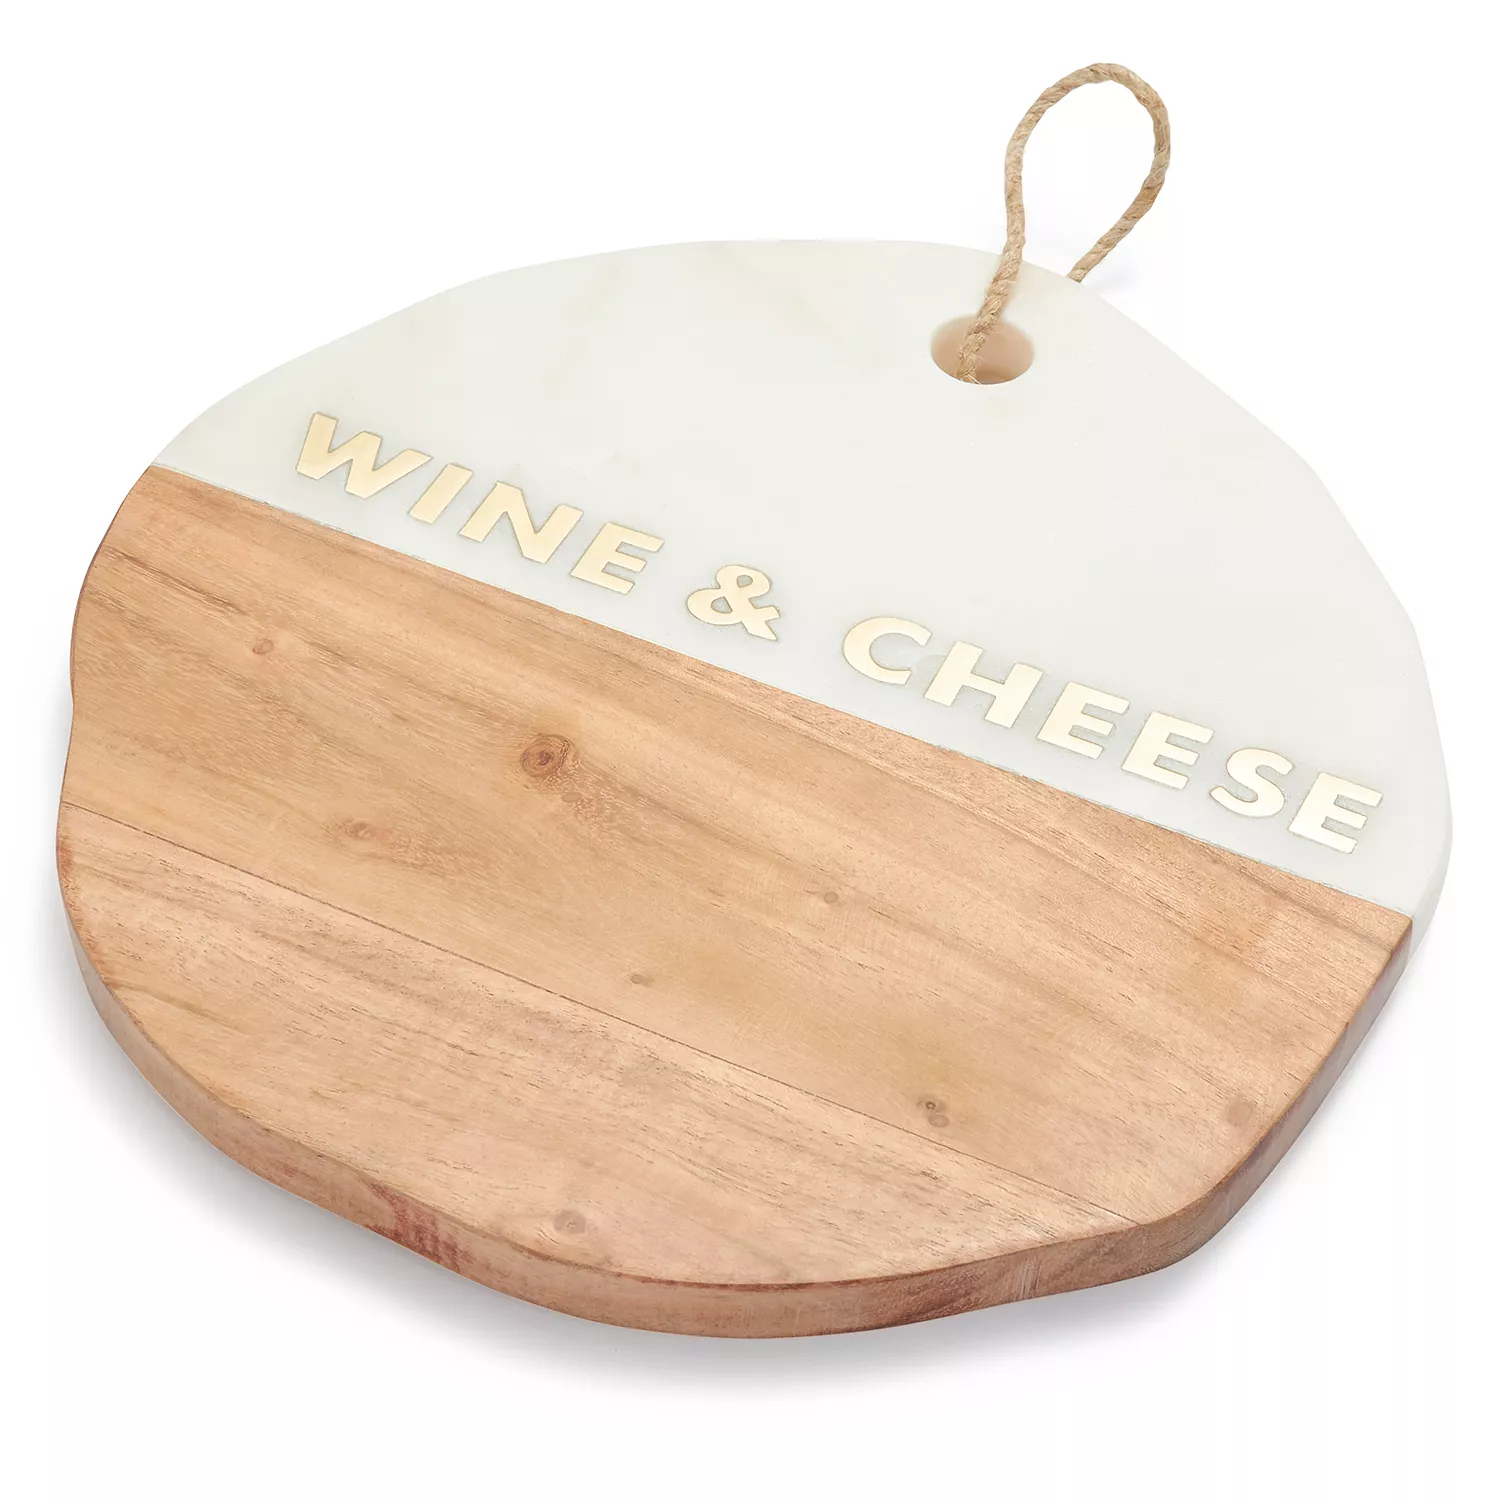 Sur La Table Wine and Cheese Serving Platter